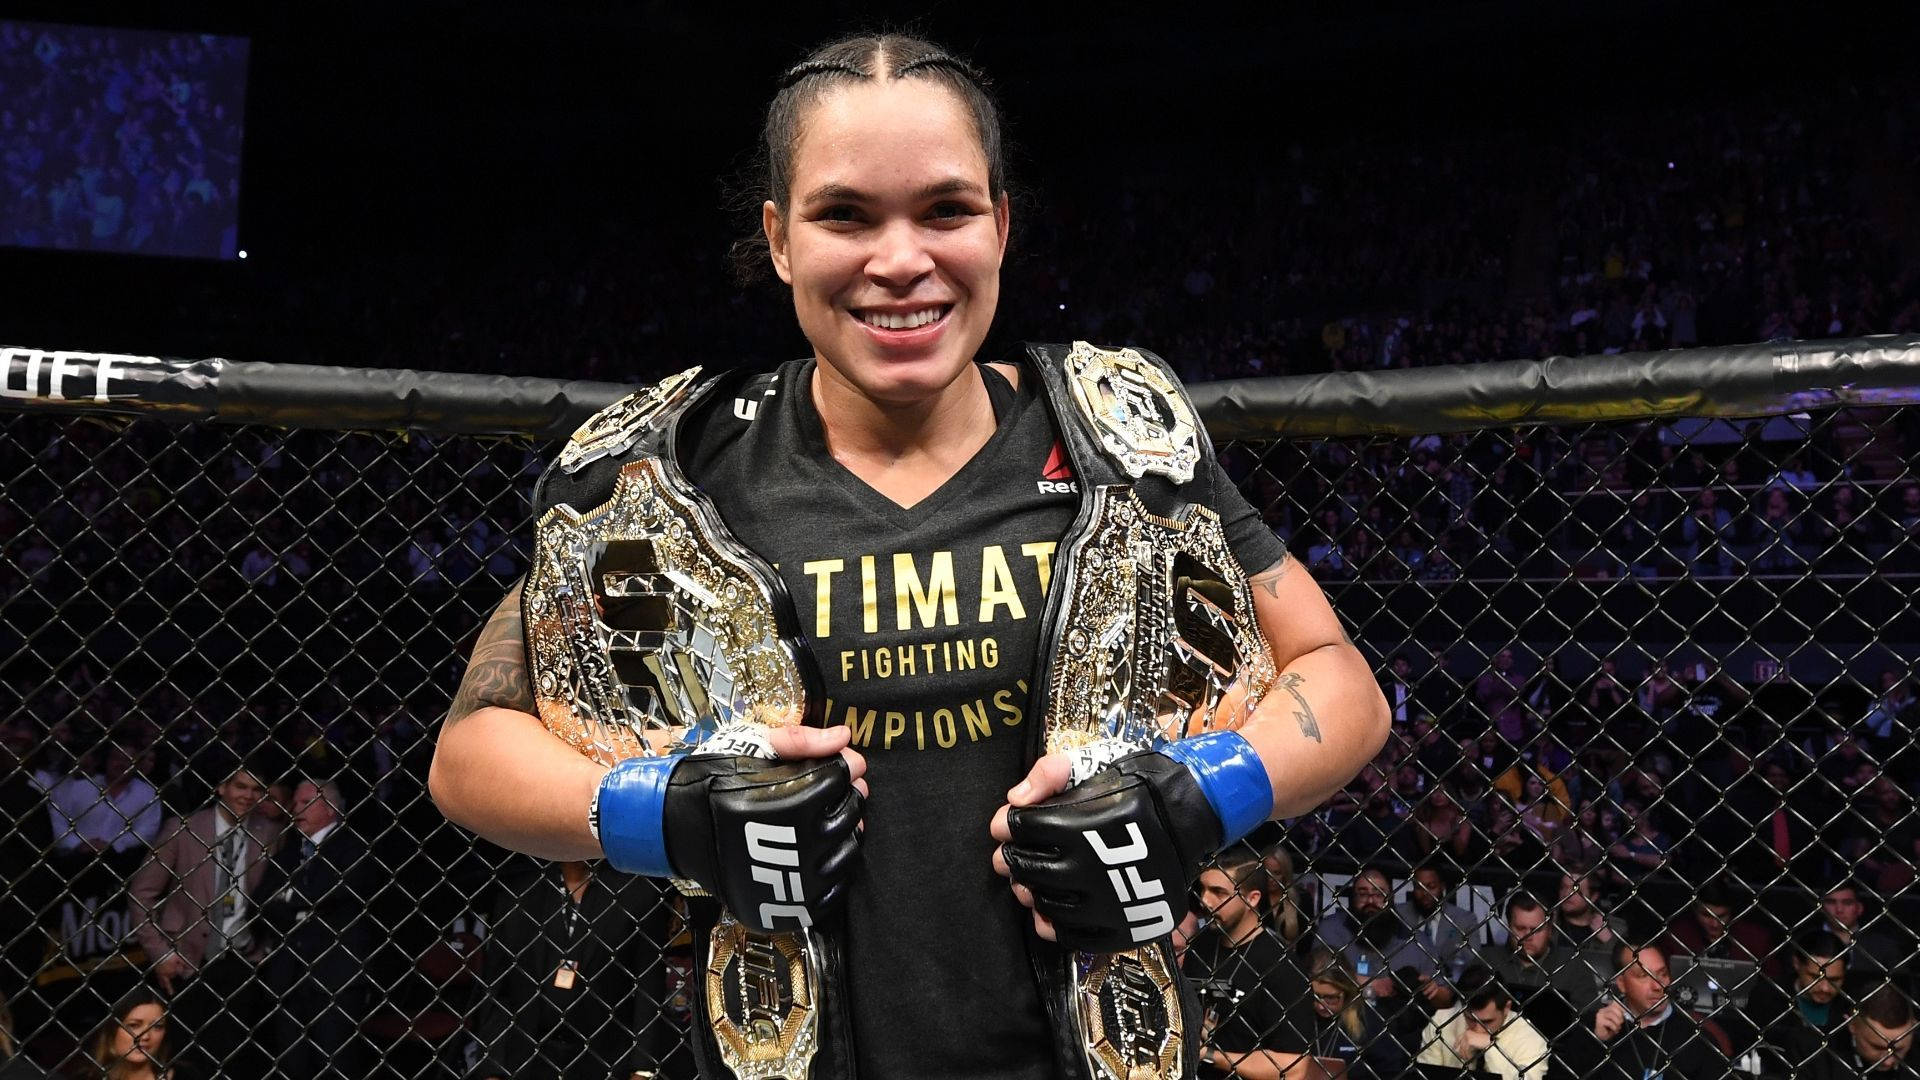 Amandanunes Mästare Smile (this Could Be Used As A Title For A Wallpaper Featuring Amanda Nunes, The Ufc Fighter, With A Victorious Smile After Winning A Championship Fight) Wallpaper